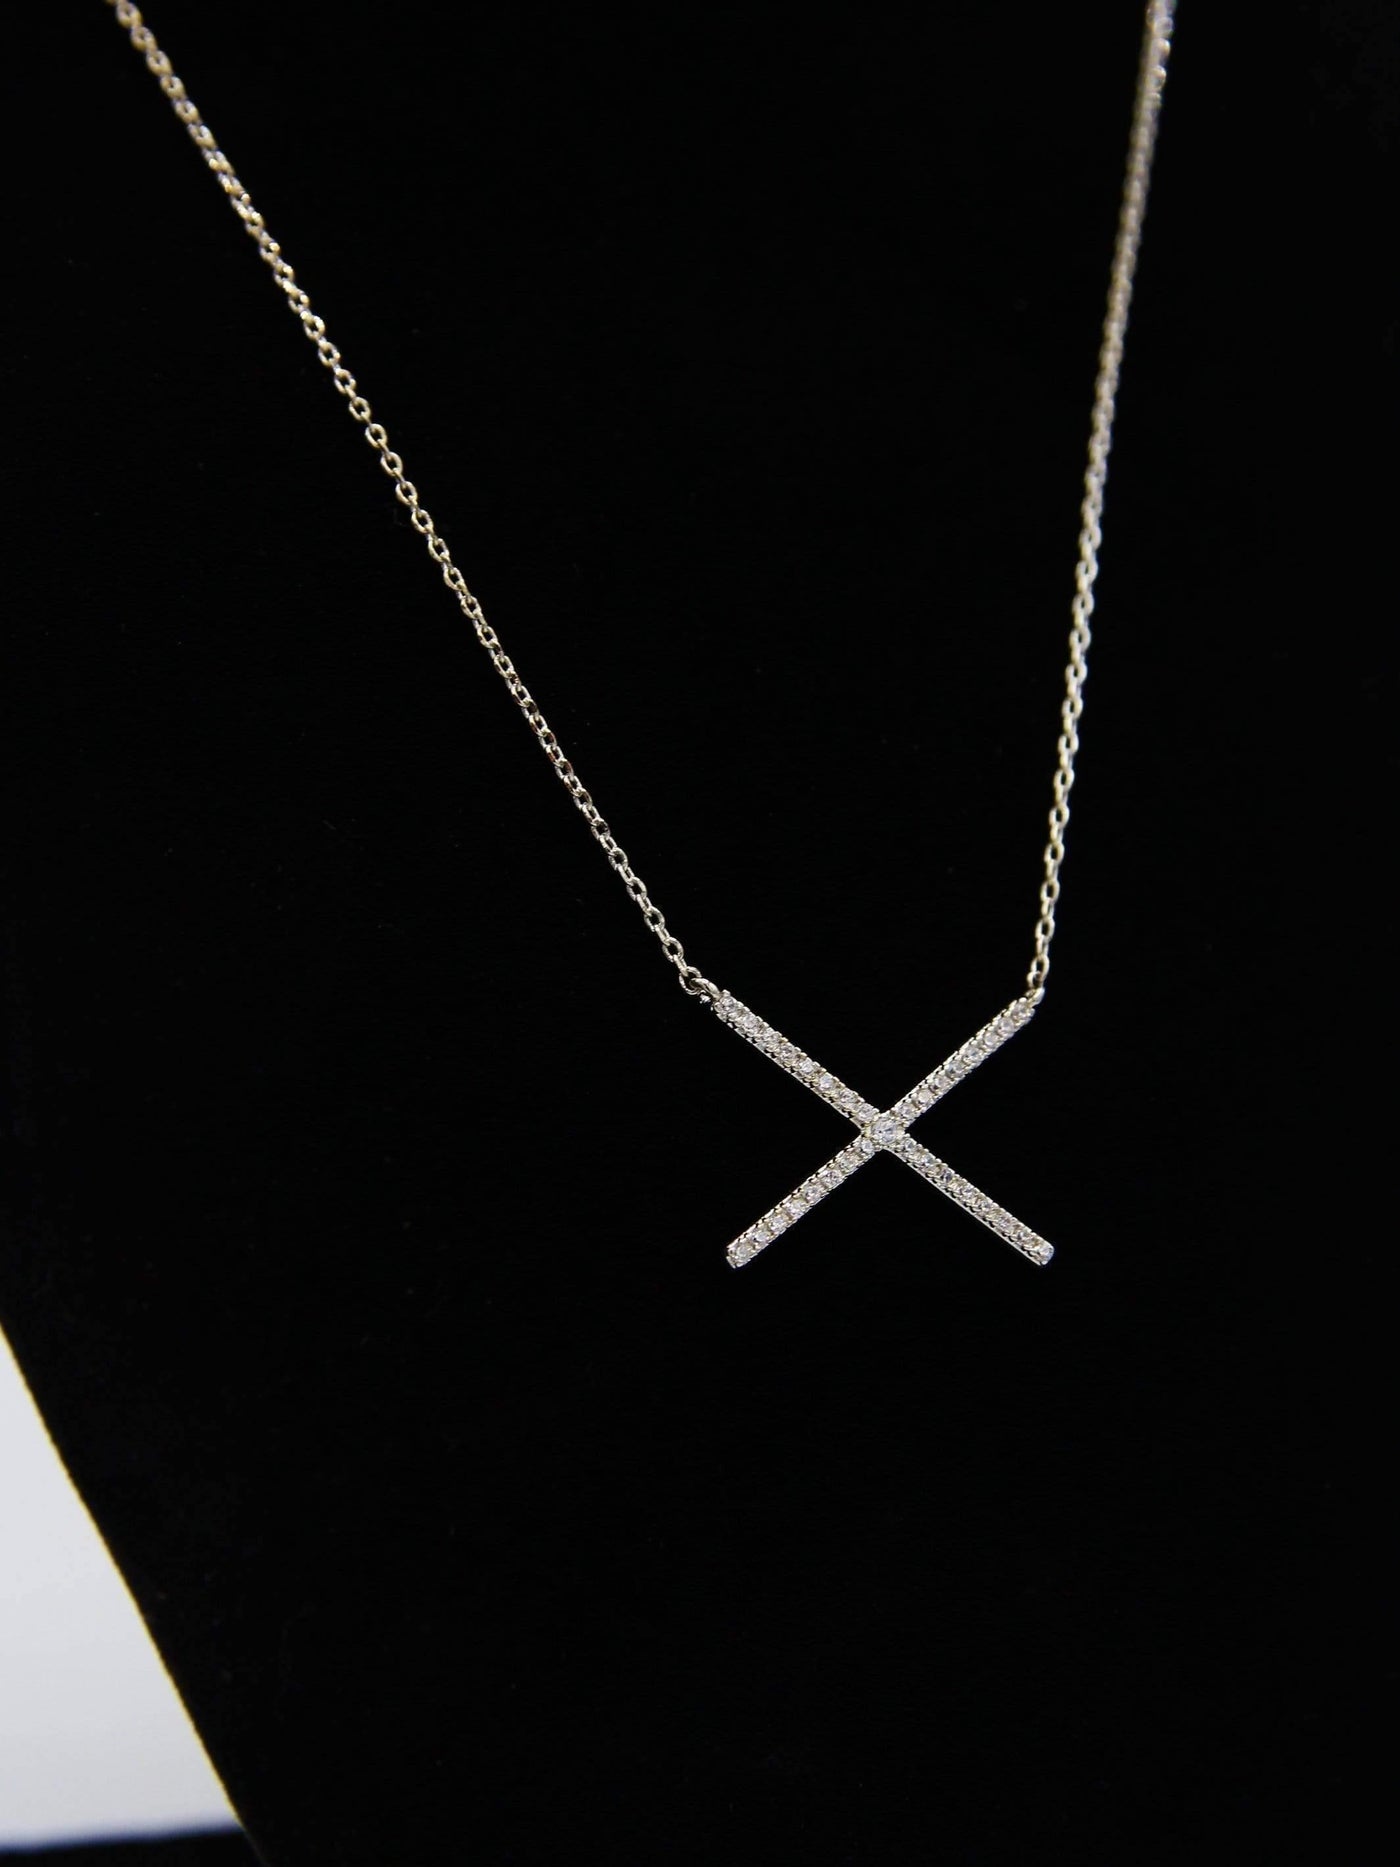 The Cross | Unique Bar Necklace - Statement Piece NY Accessories, Brooklyn Boutique, chic, cute accessories, cute fashion accessories, fashion accessory, fashion jewelry, final sale, Jewelry, Necklace, not clearance, Ships from USA, Silver, Silver necklace, SPNY Exclusive, statement, Statement Accessories, statement piece, Statement Piece Boutique, statement piece ny, Statement Pieces, Statement Pieces Boutique, Women's Boutique Necklaces